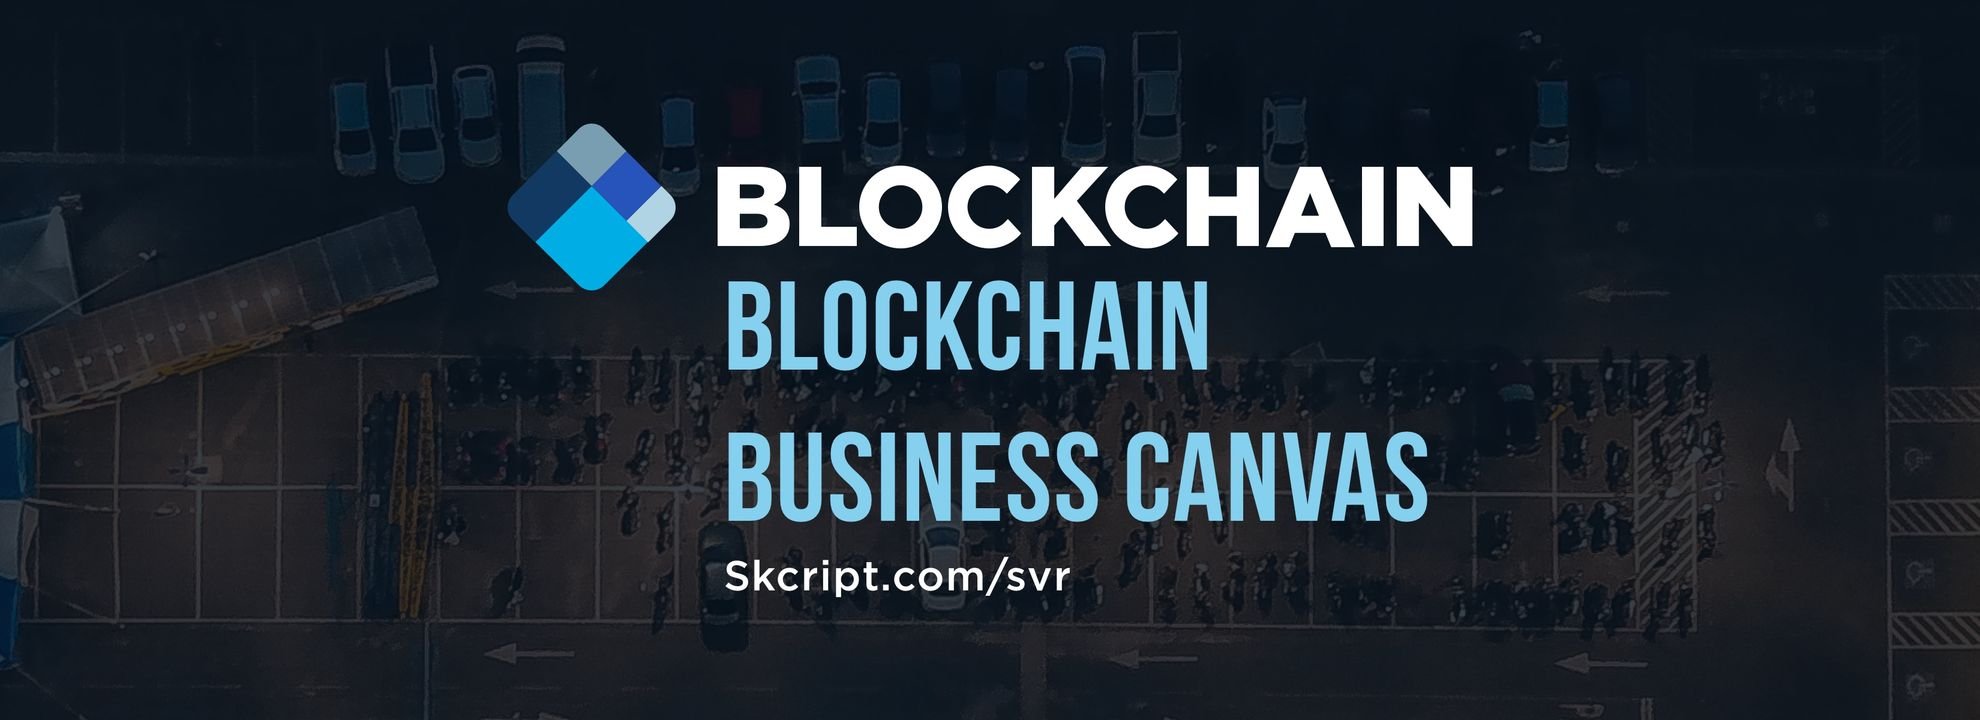 Introducing Blockchain Business Canvas. Evaluate your blockchain necessity with ease.